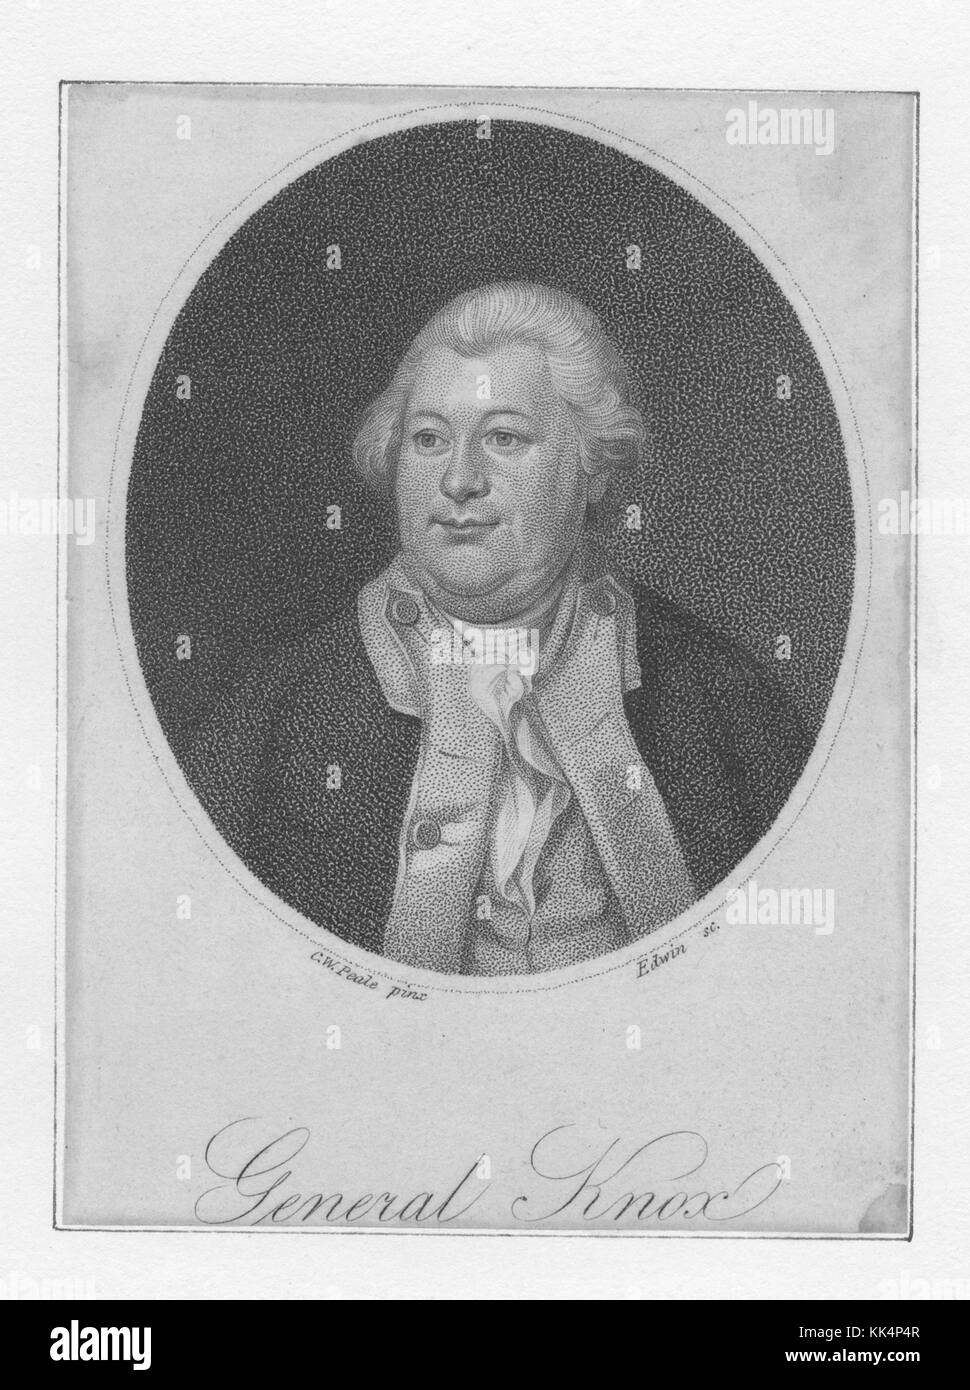 An etching from a portrait of General Henry Knox, he was an American military officer who served as part of Continental Army and the United States Army, he became the chief artillery officer and oversaw the establishment of training centers for artillerymen and the manufacturing centers for weapons, he was the United States First Secretary of War, United States, 1800. From the New York Public Library. Stock Photo